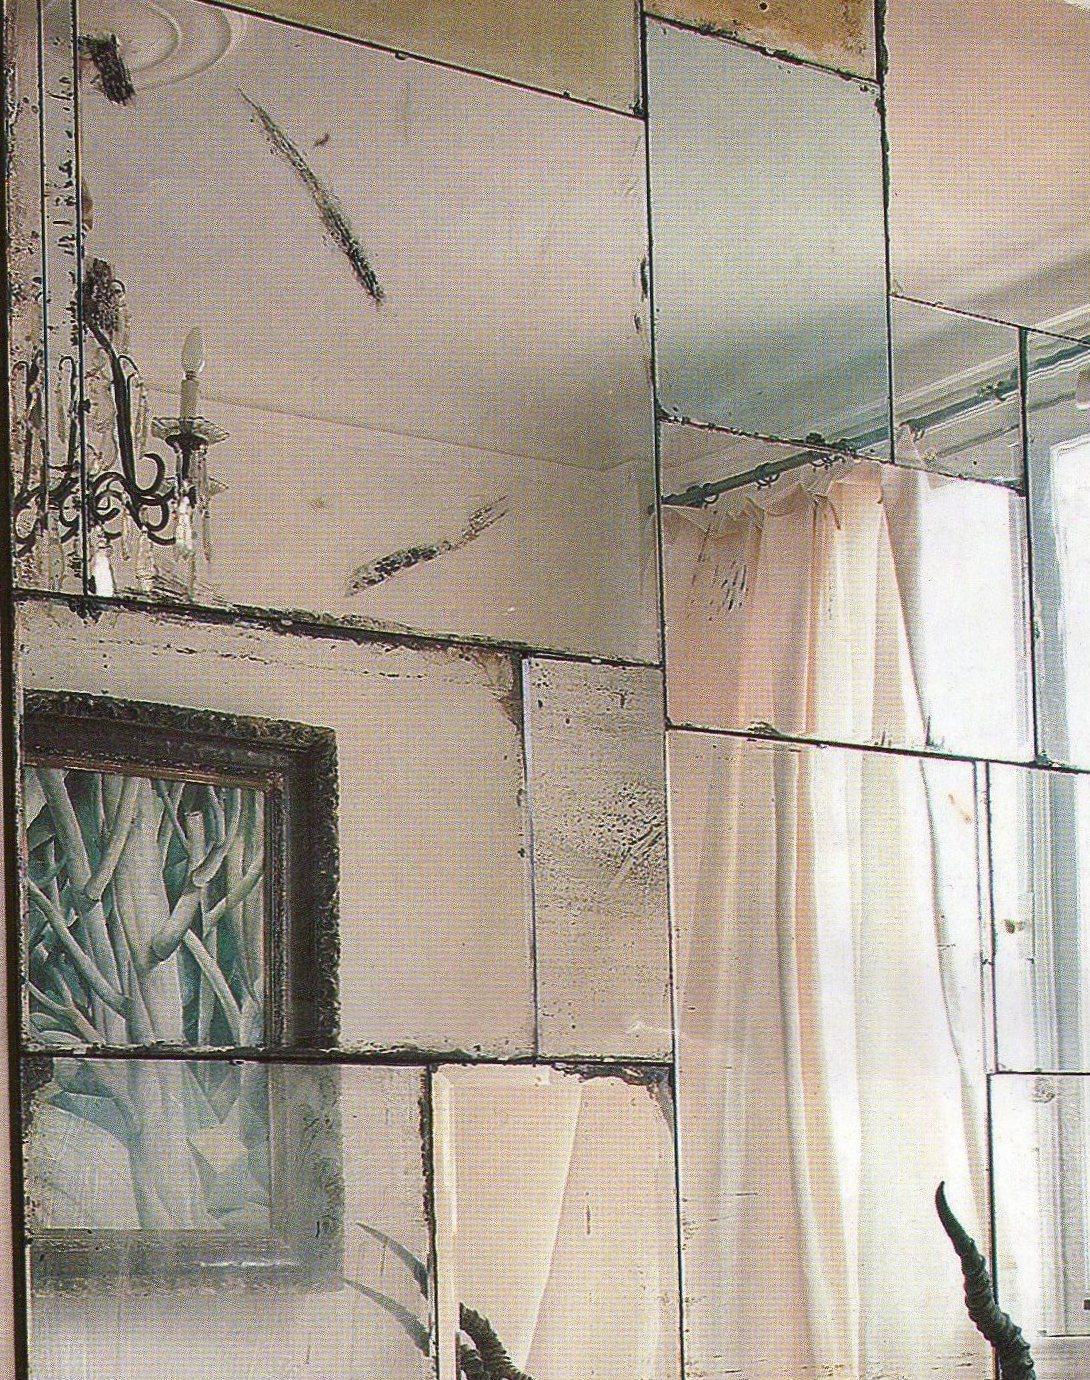 Spanish Industrial Custom Made Artisanal Mirrors Hand-Aged Authentic Finish Frameless M For Sale